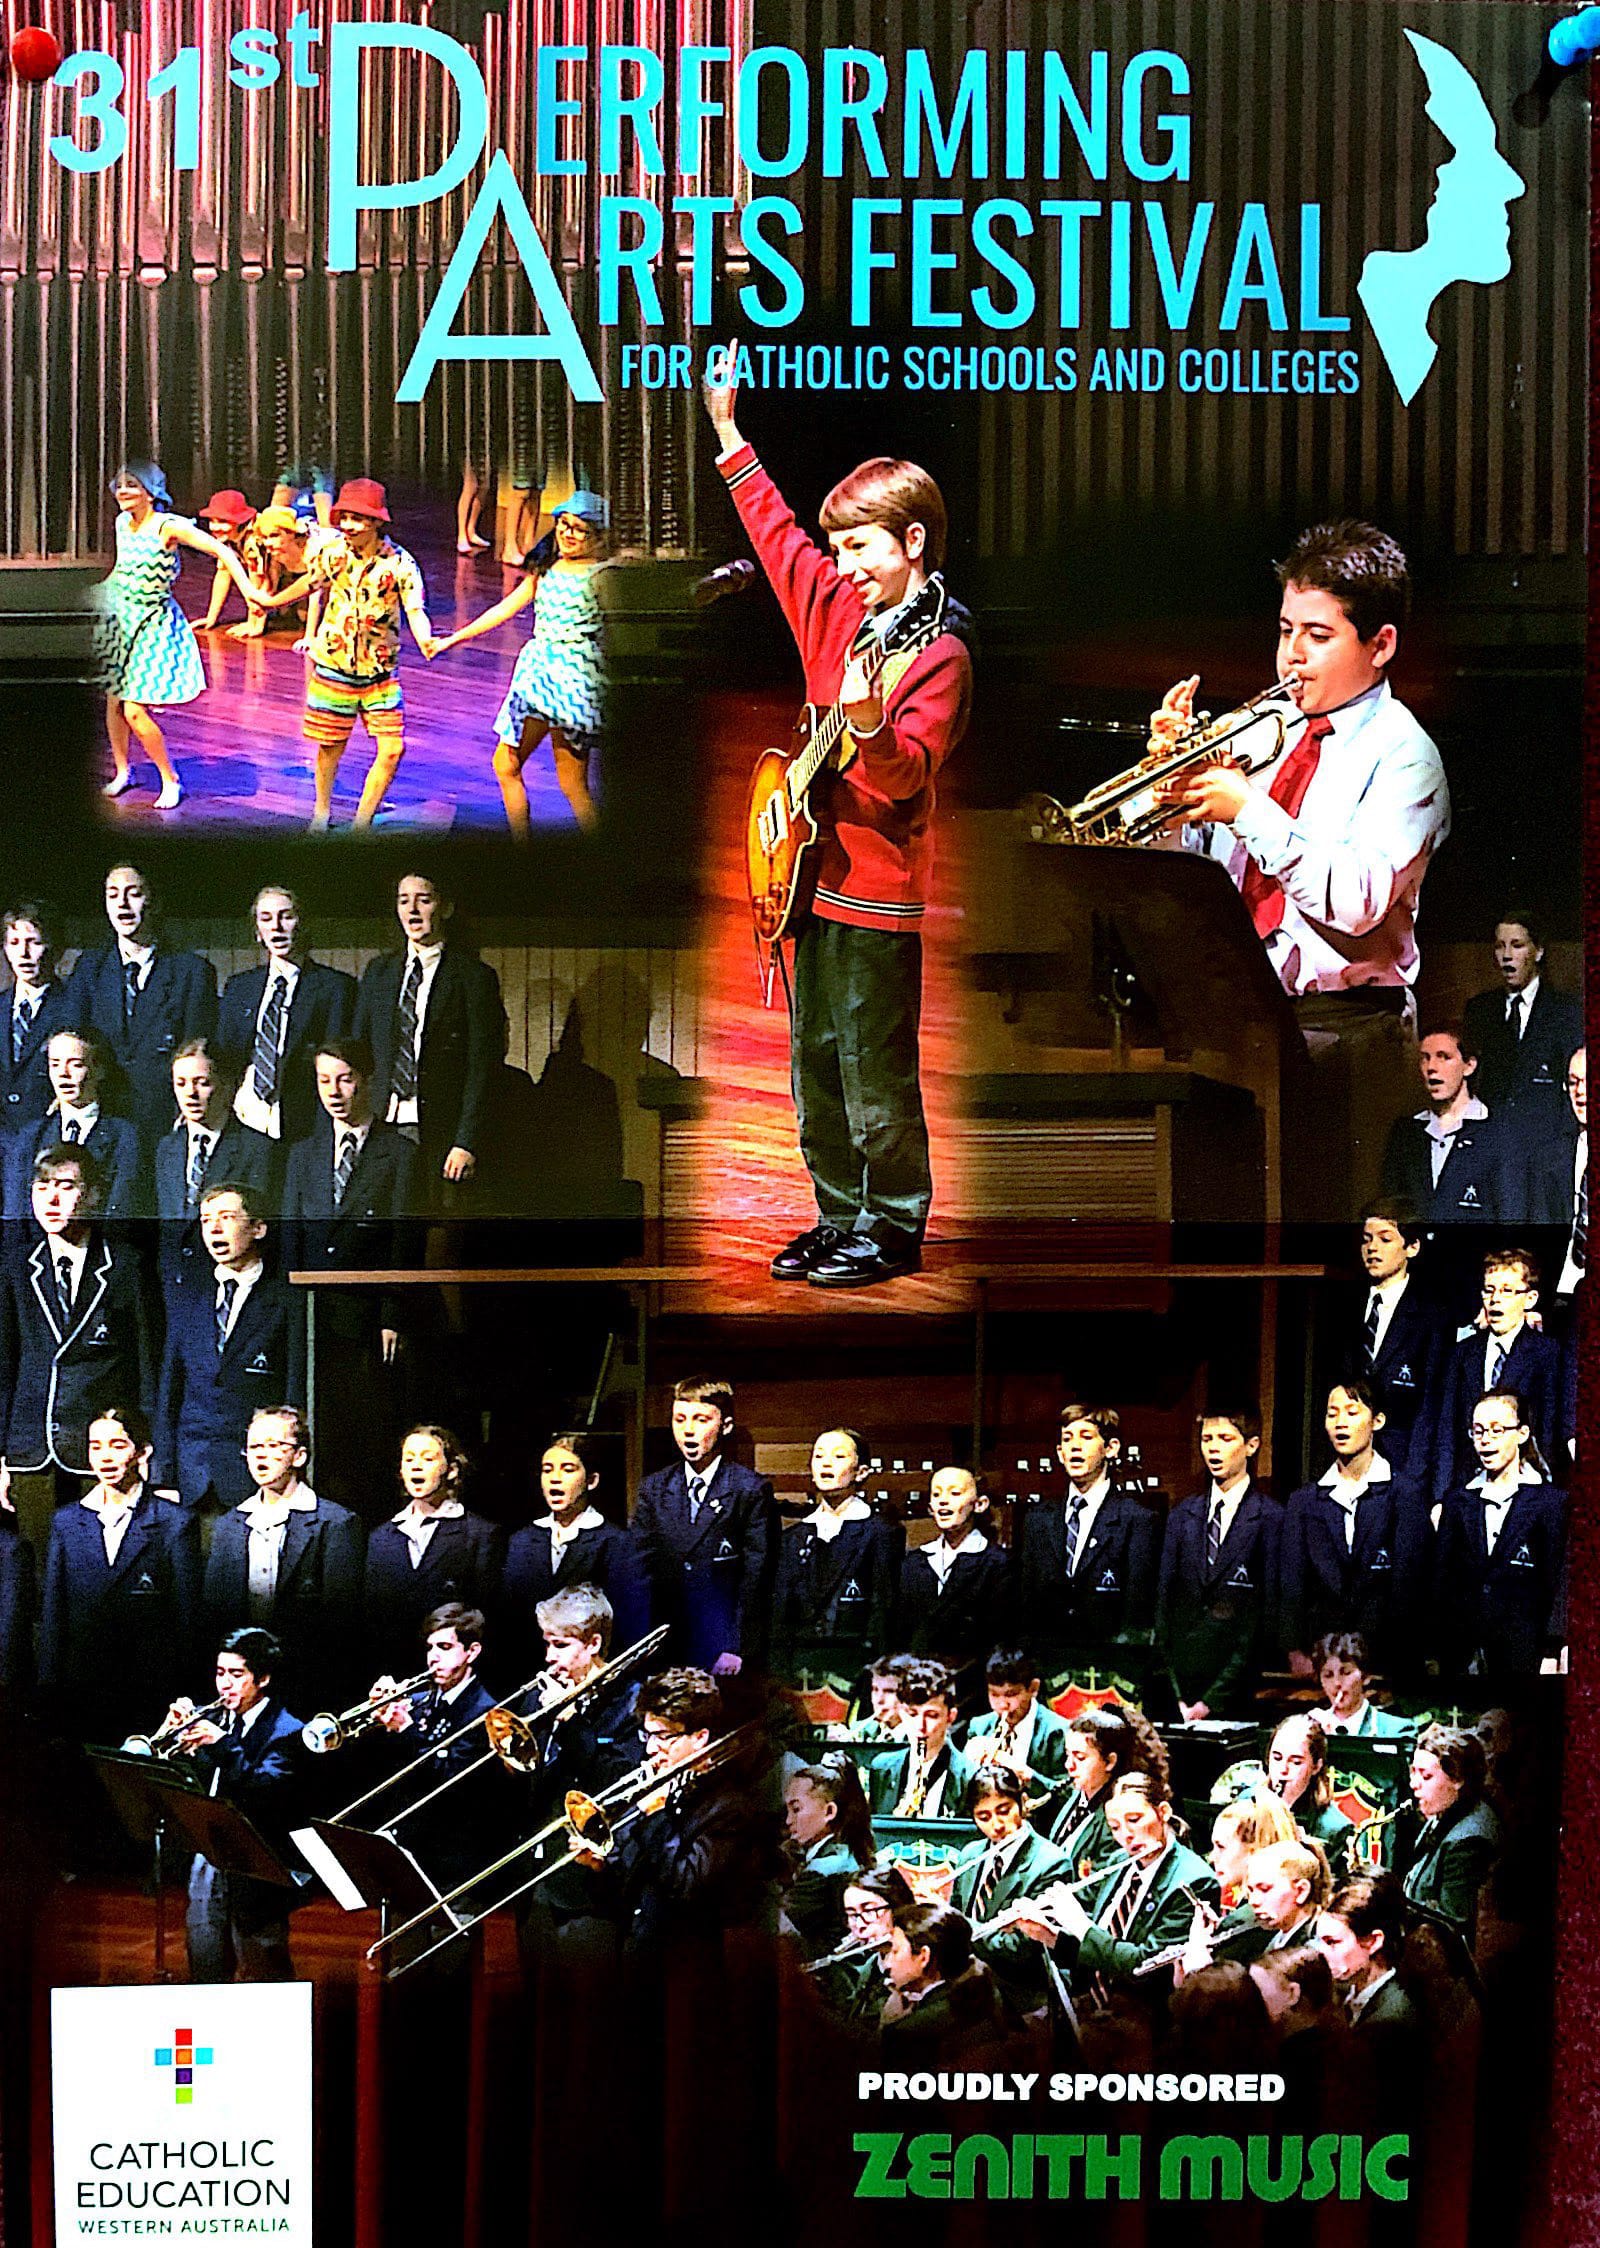 Performing Arts Festival for Catholic Schools and Colleges 